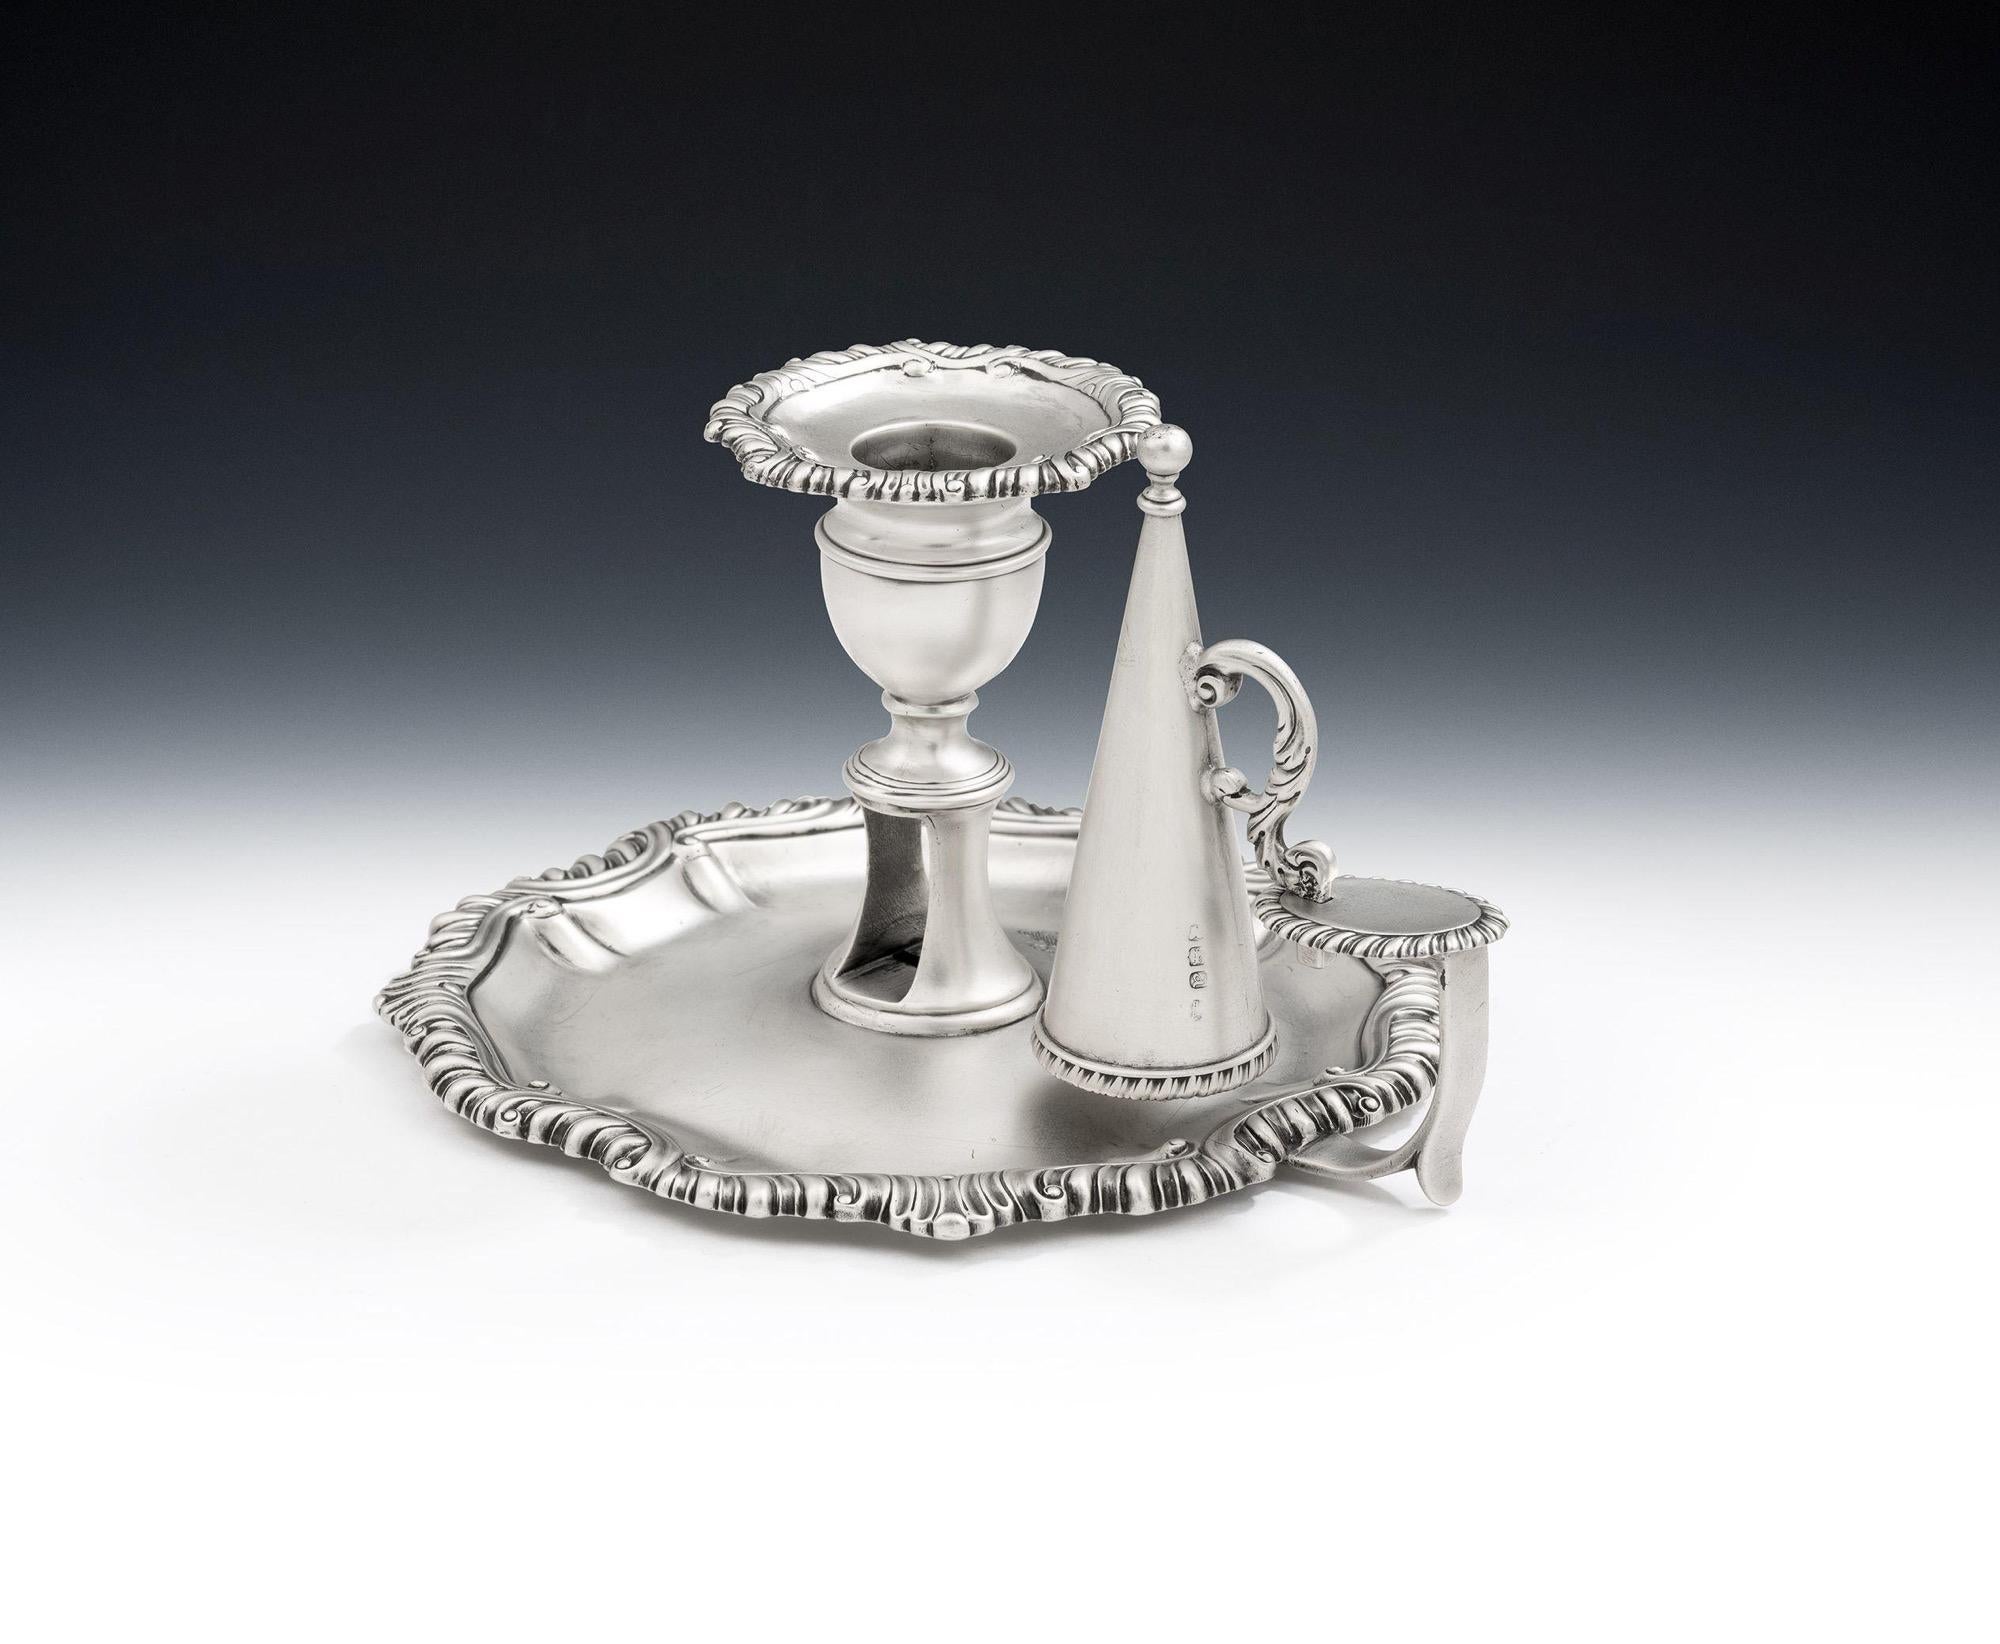 A very fine George III Chamber Candlestick made in London in 1816 by Rebecca Emes & Edward Barnard.

The Chamberstick displays a shaped circular base, with a raised, pleated, border decorated with gadrooning and scrolls. The central shaft is